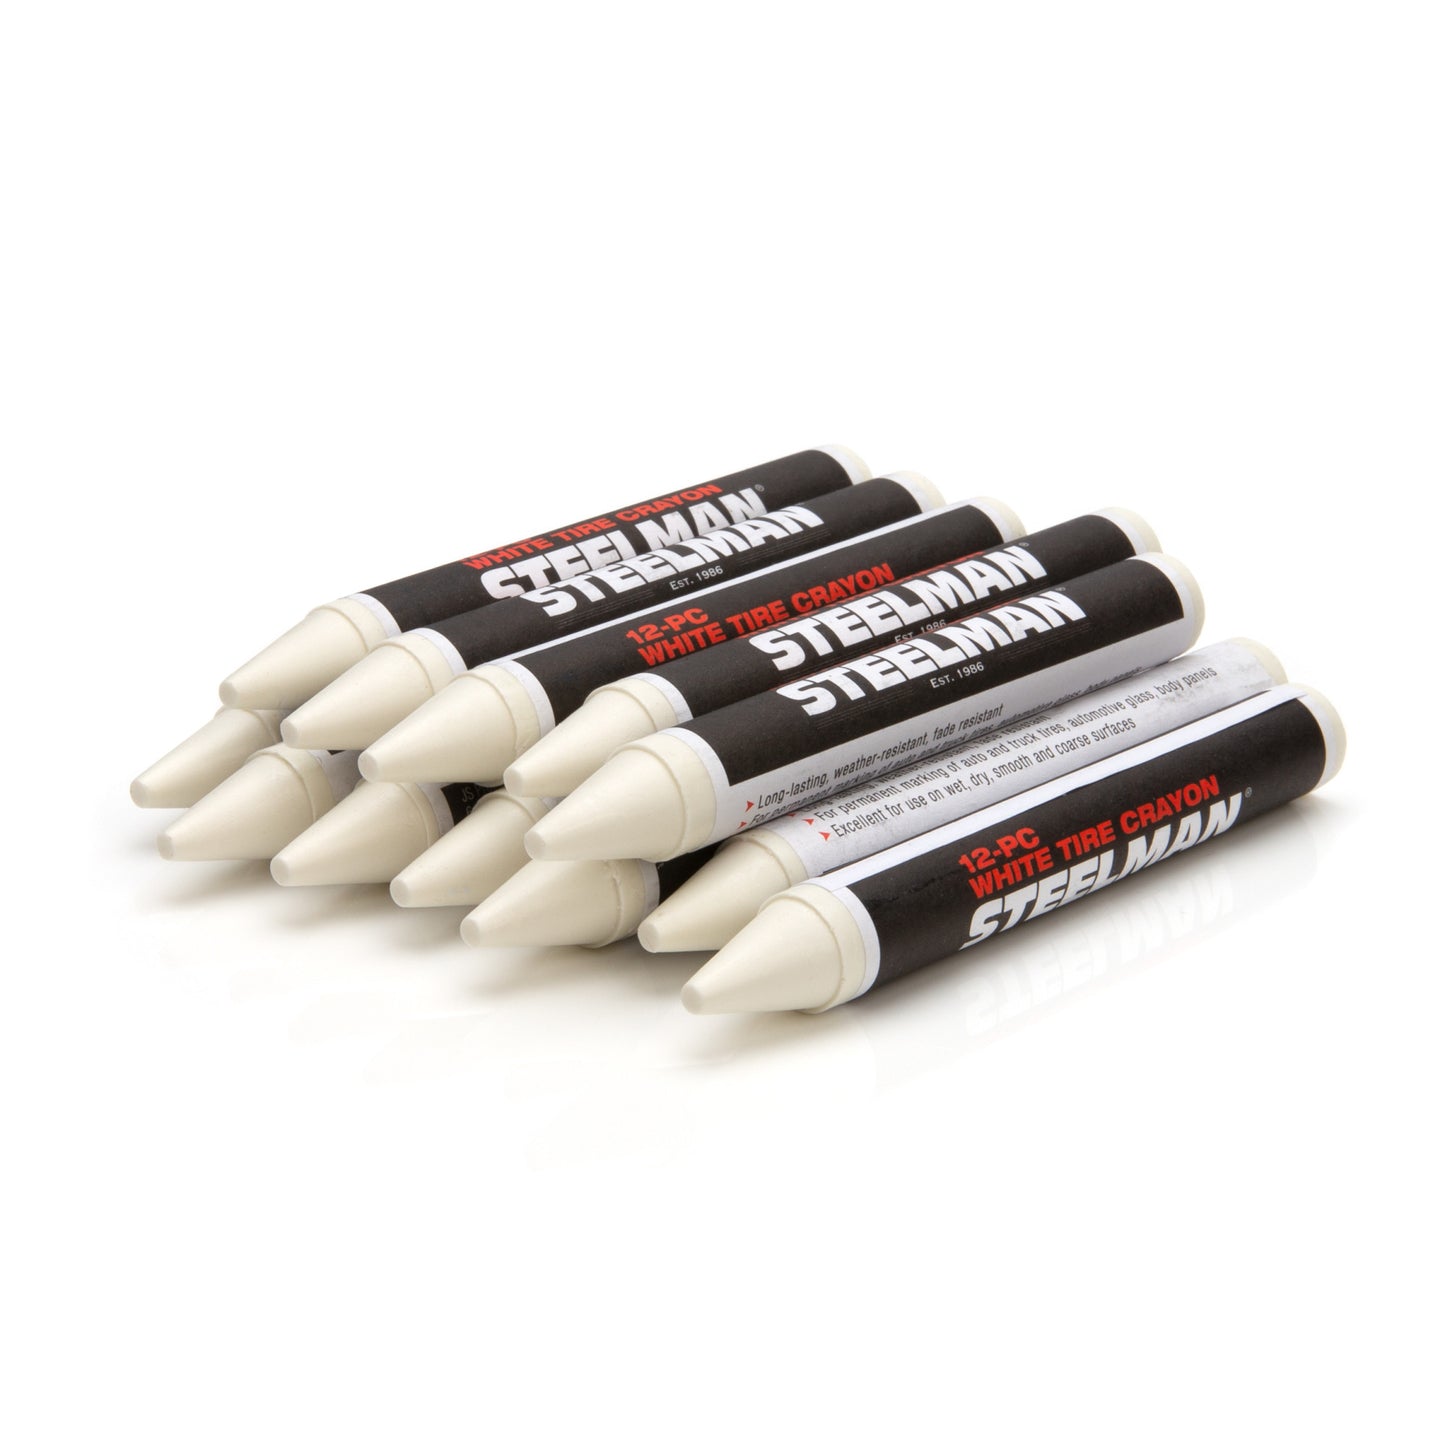 White Tire Marking Crayons, Box of 12 (2-Pack)